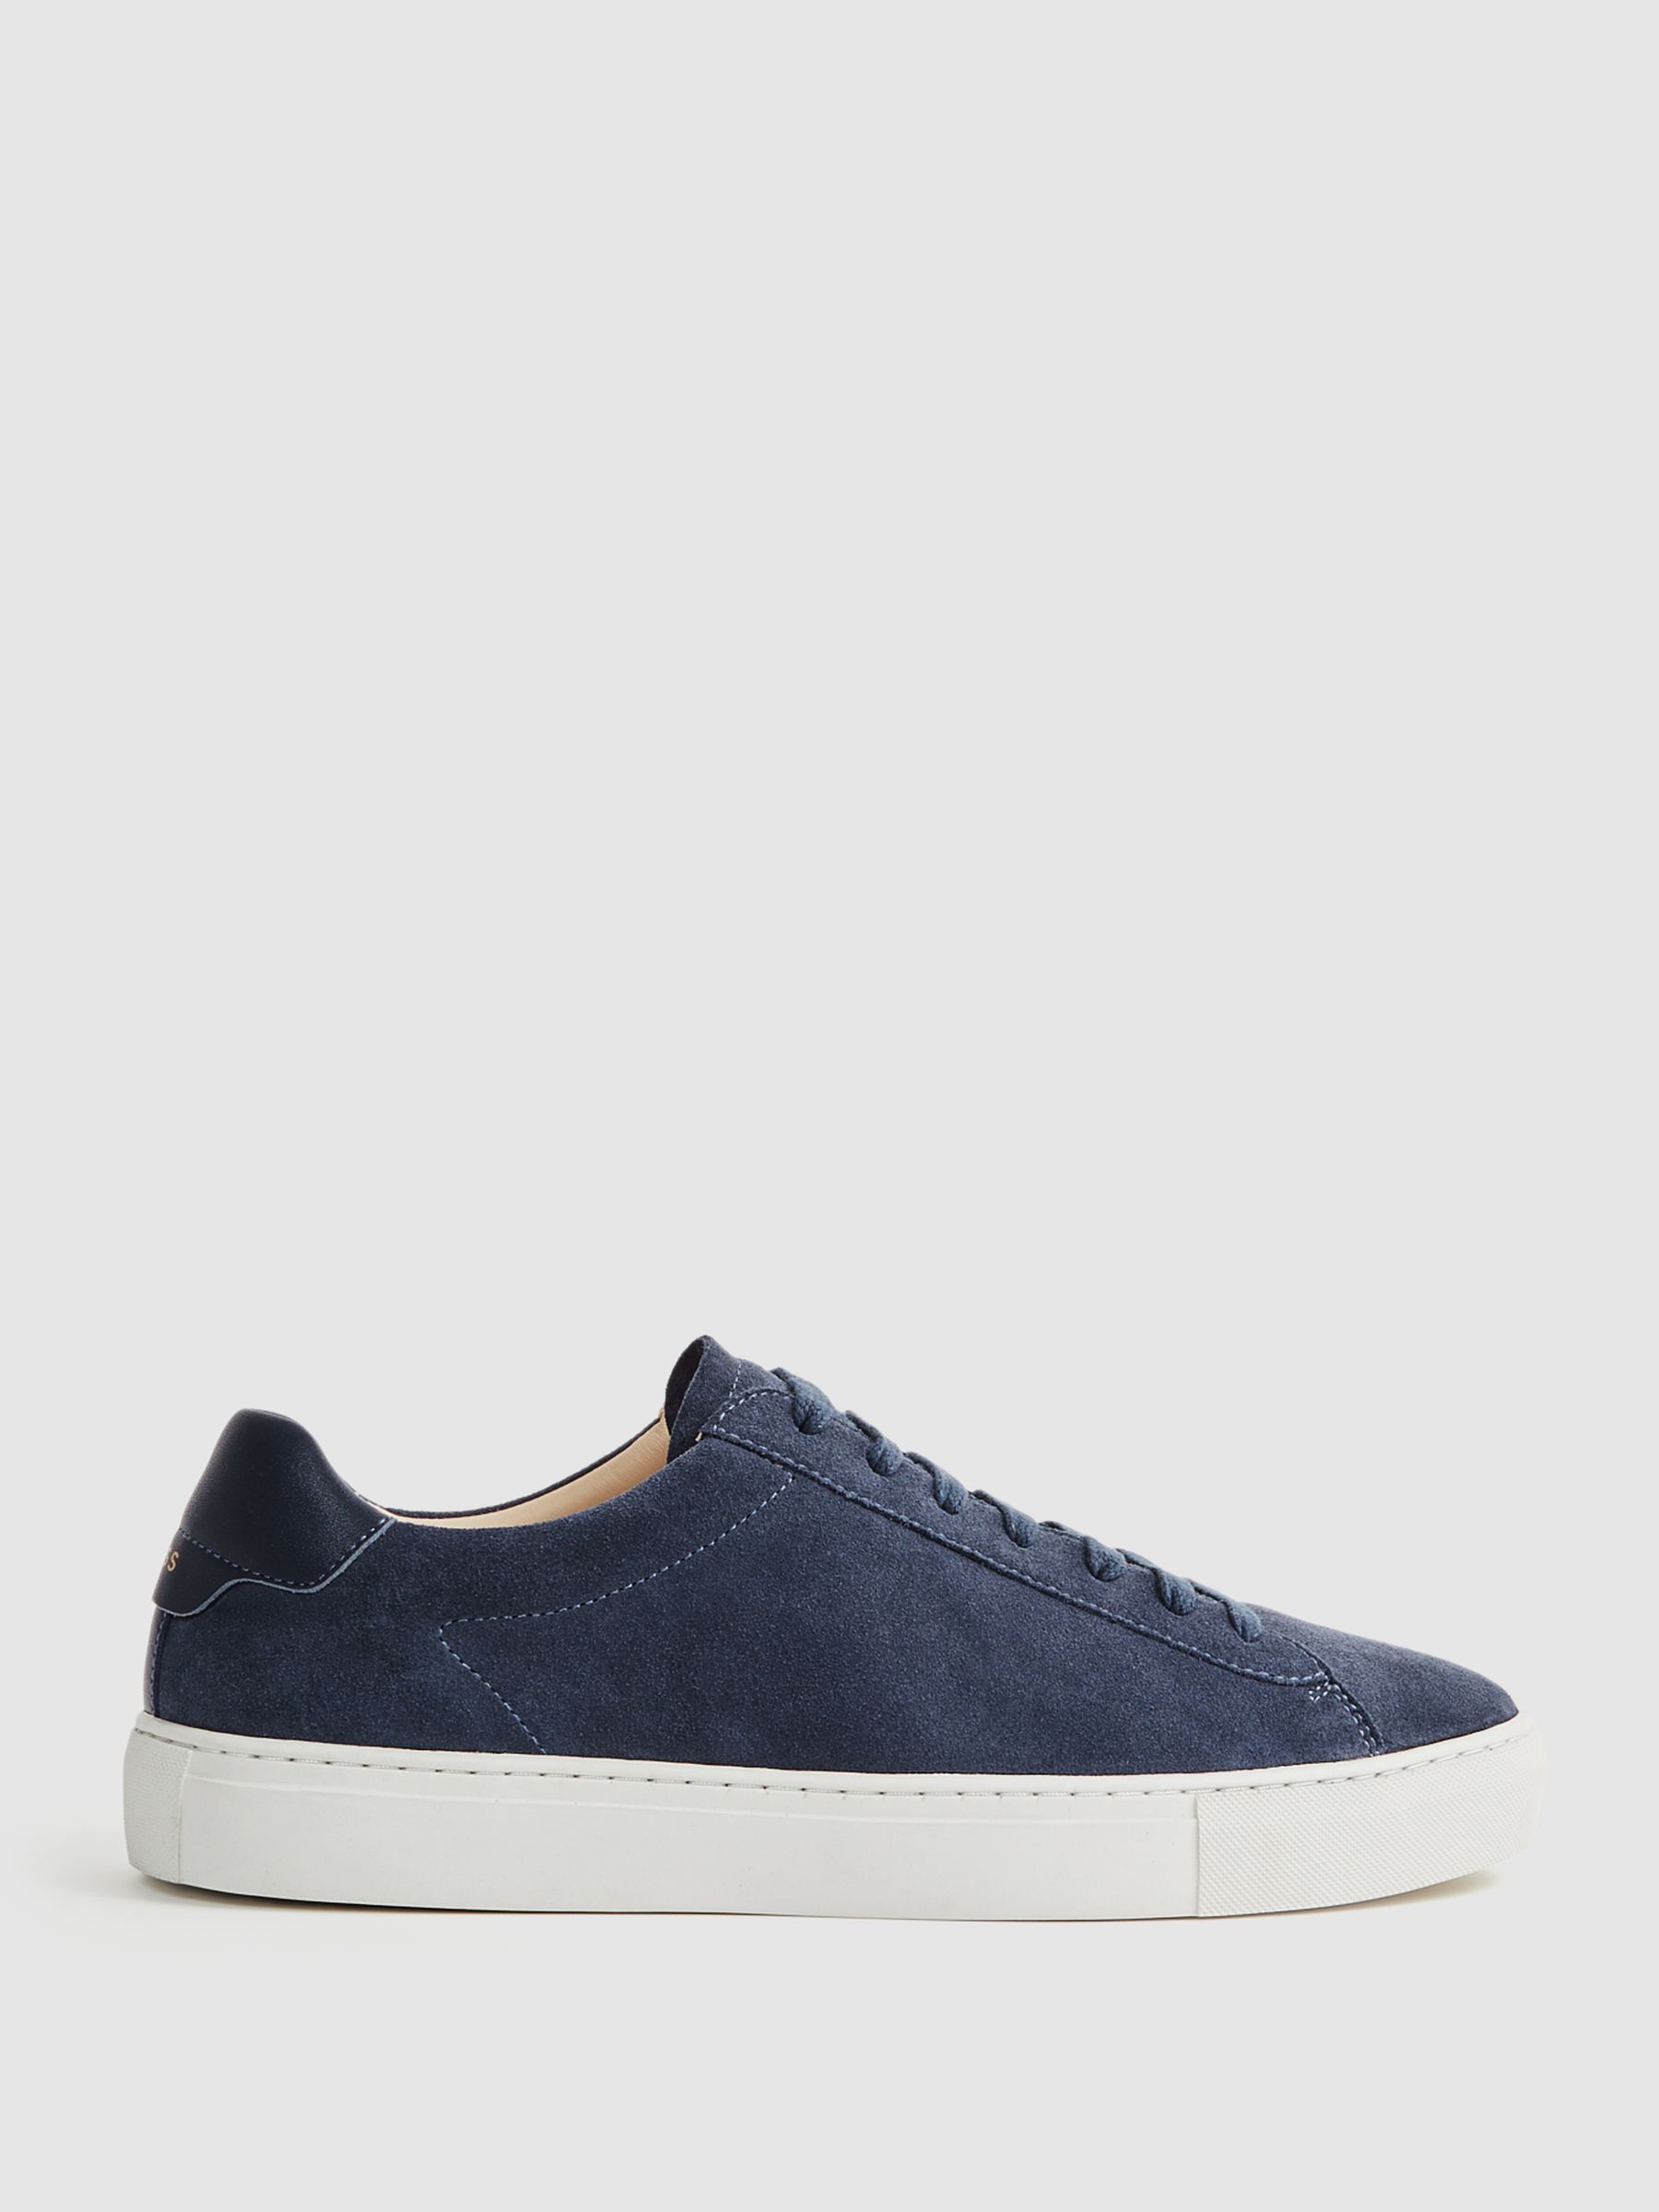 Reiss Finley Suede Suede Trainers - REISS